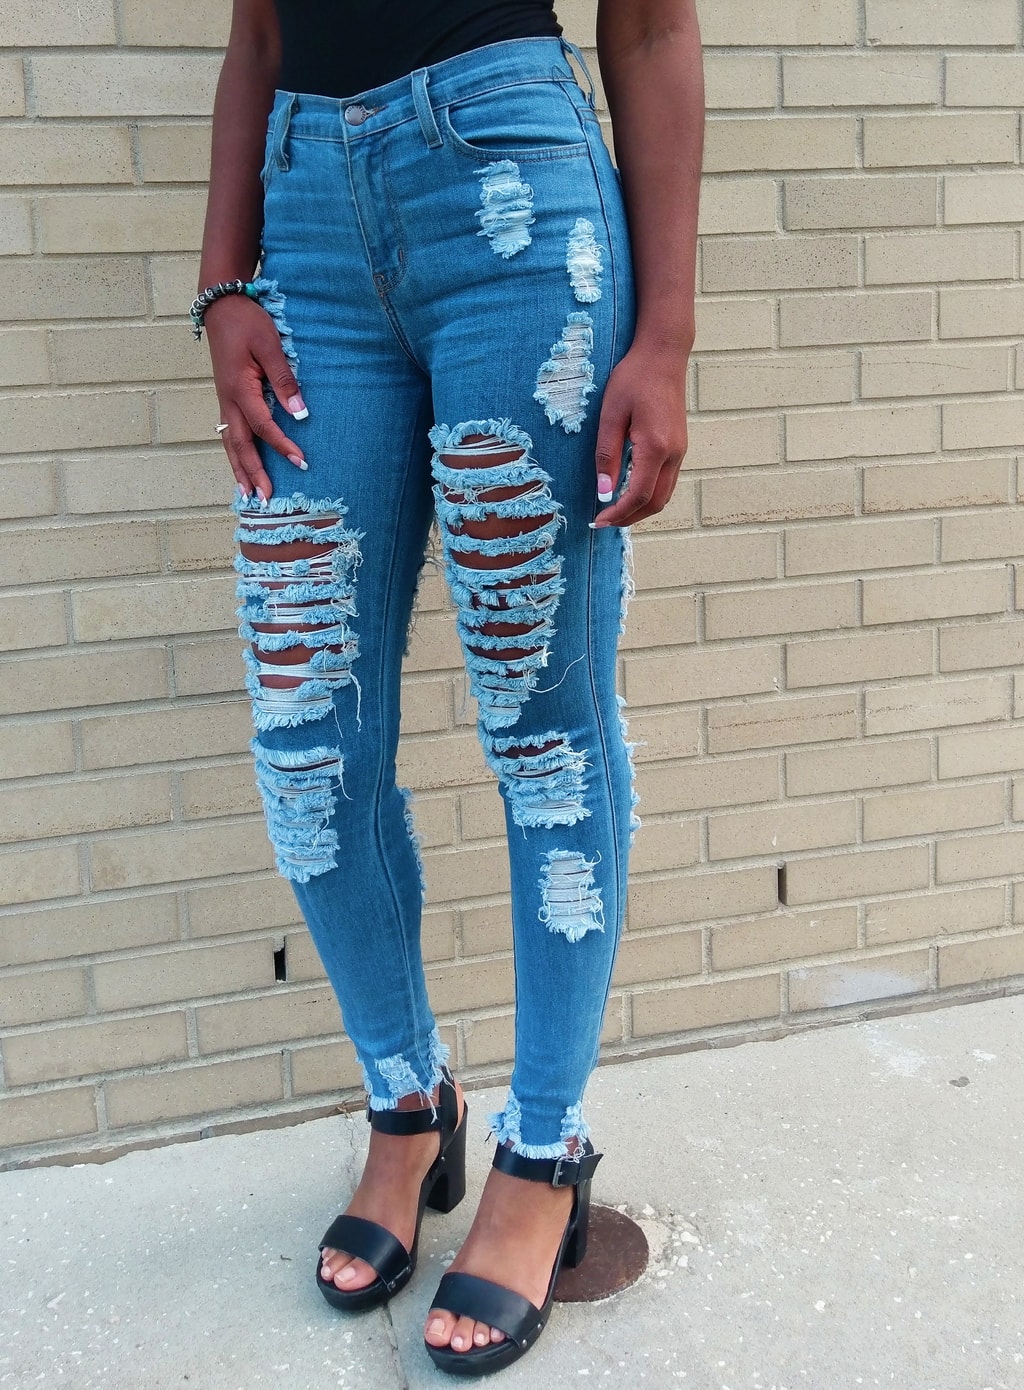 Payton wears ultra-shredded jeans with black chunky heeled sandals.